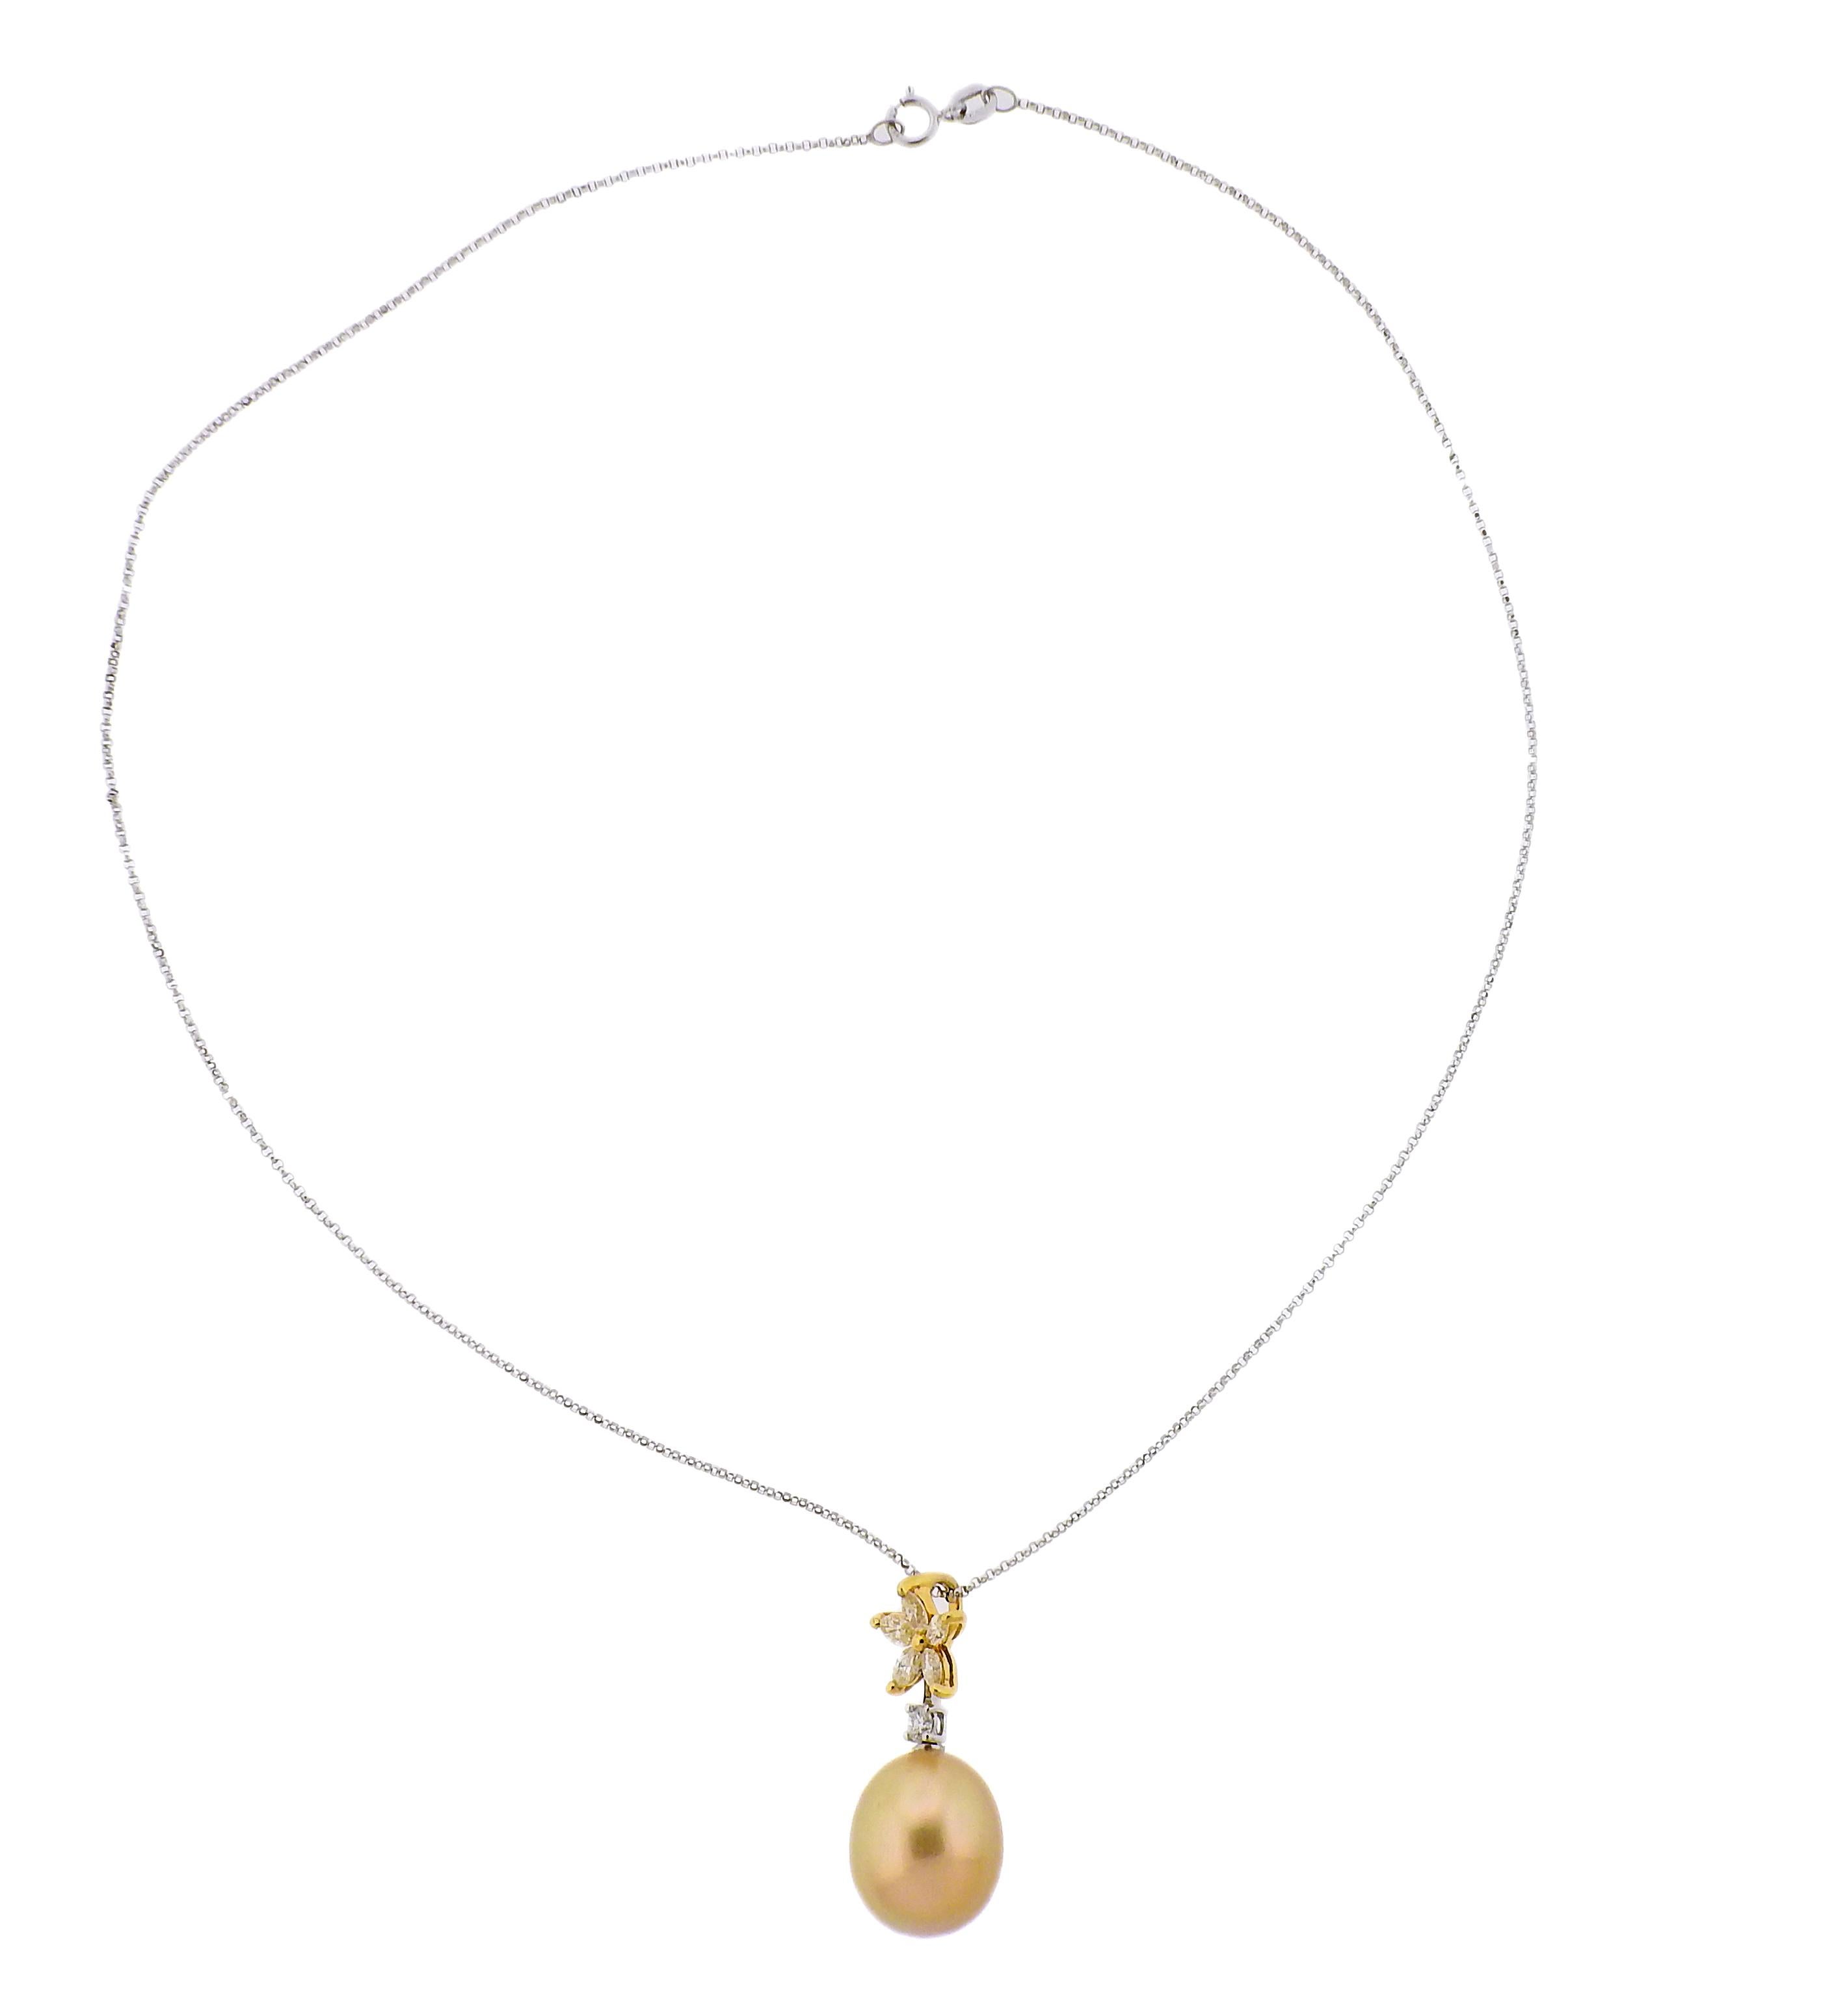 18k yellow/white gold South Sea Pearl Necklace by Assael, set with approx 0.58ctw of VS G Yellow diamonds. Brand new without tags, comes with Assael pouch. Retail - $5000.  Necklace is 16